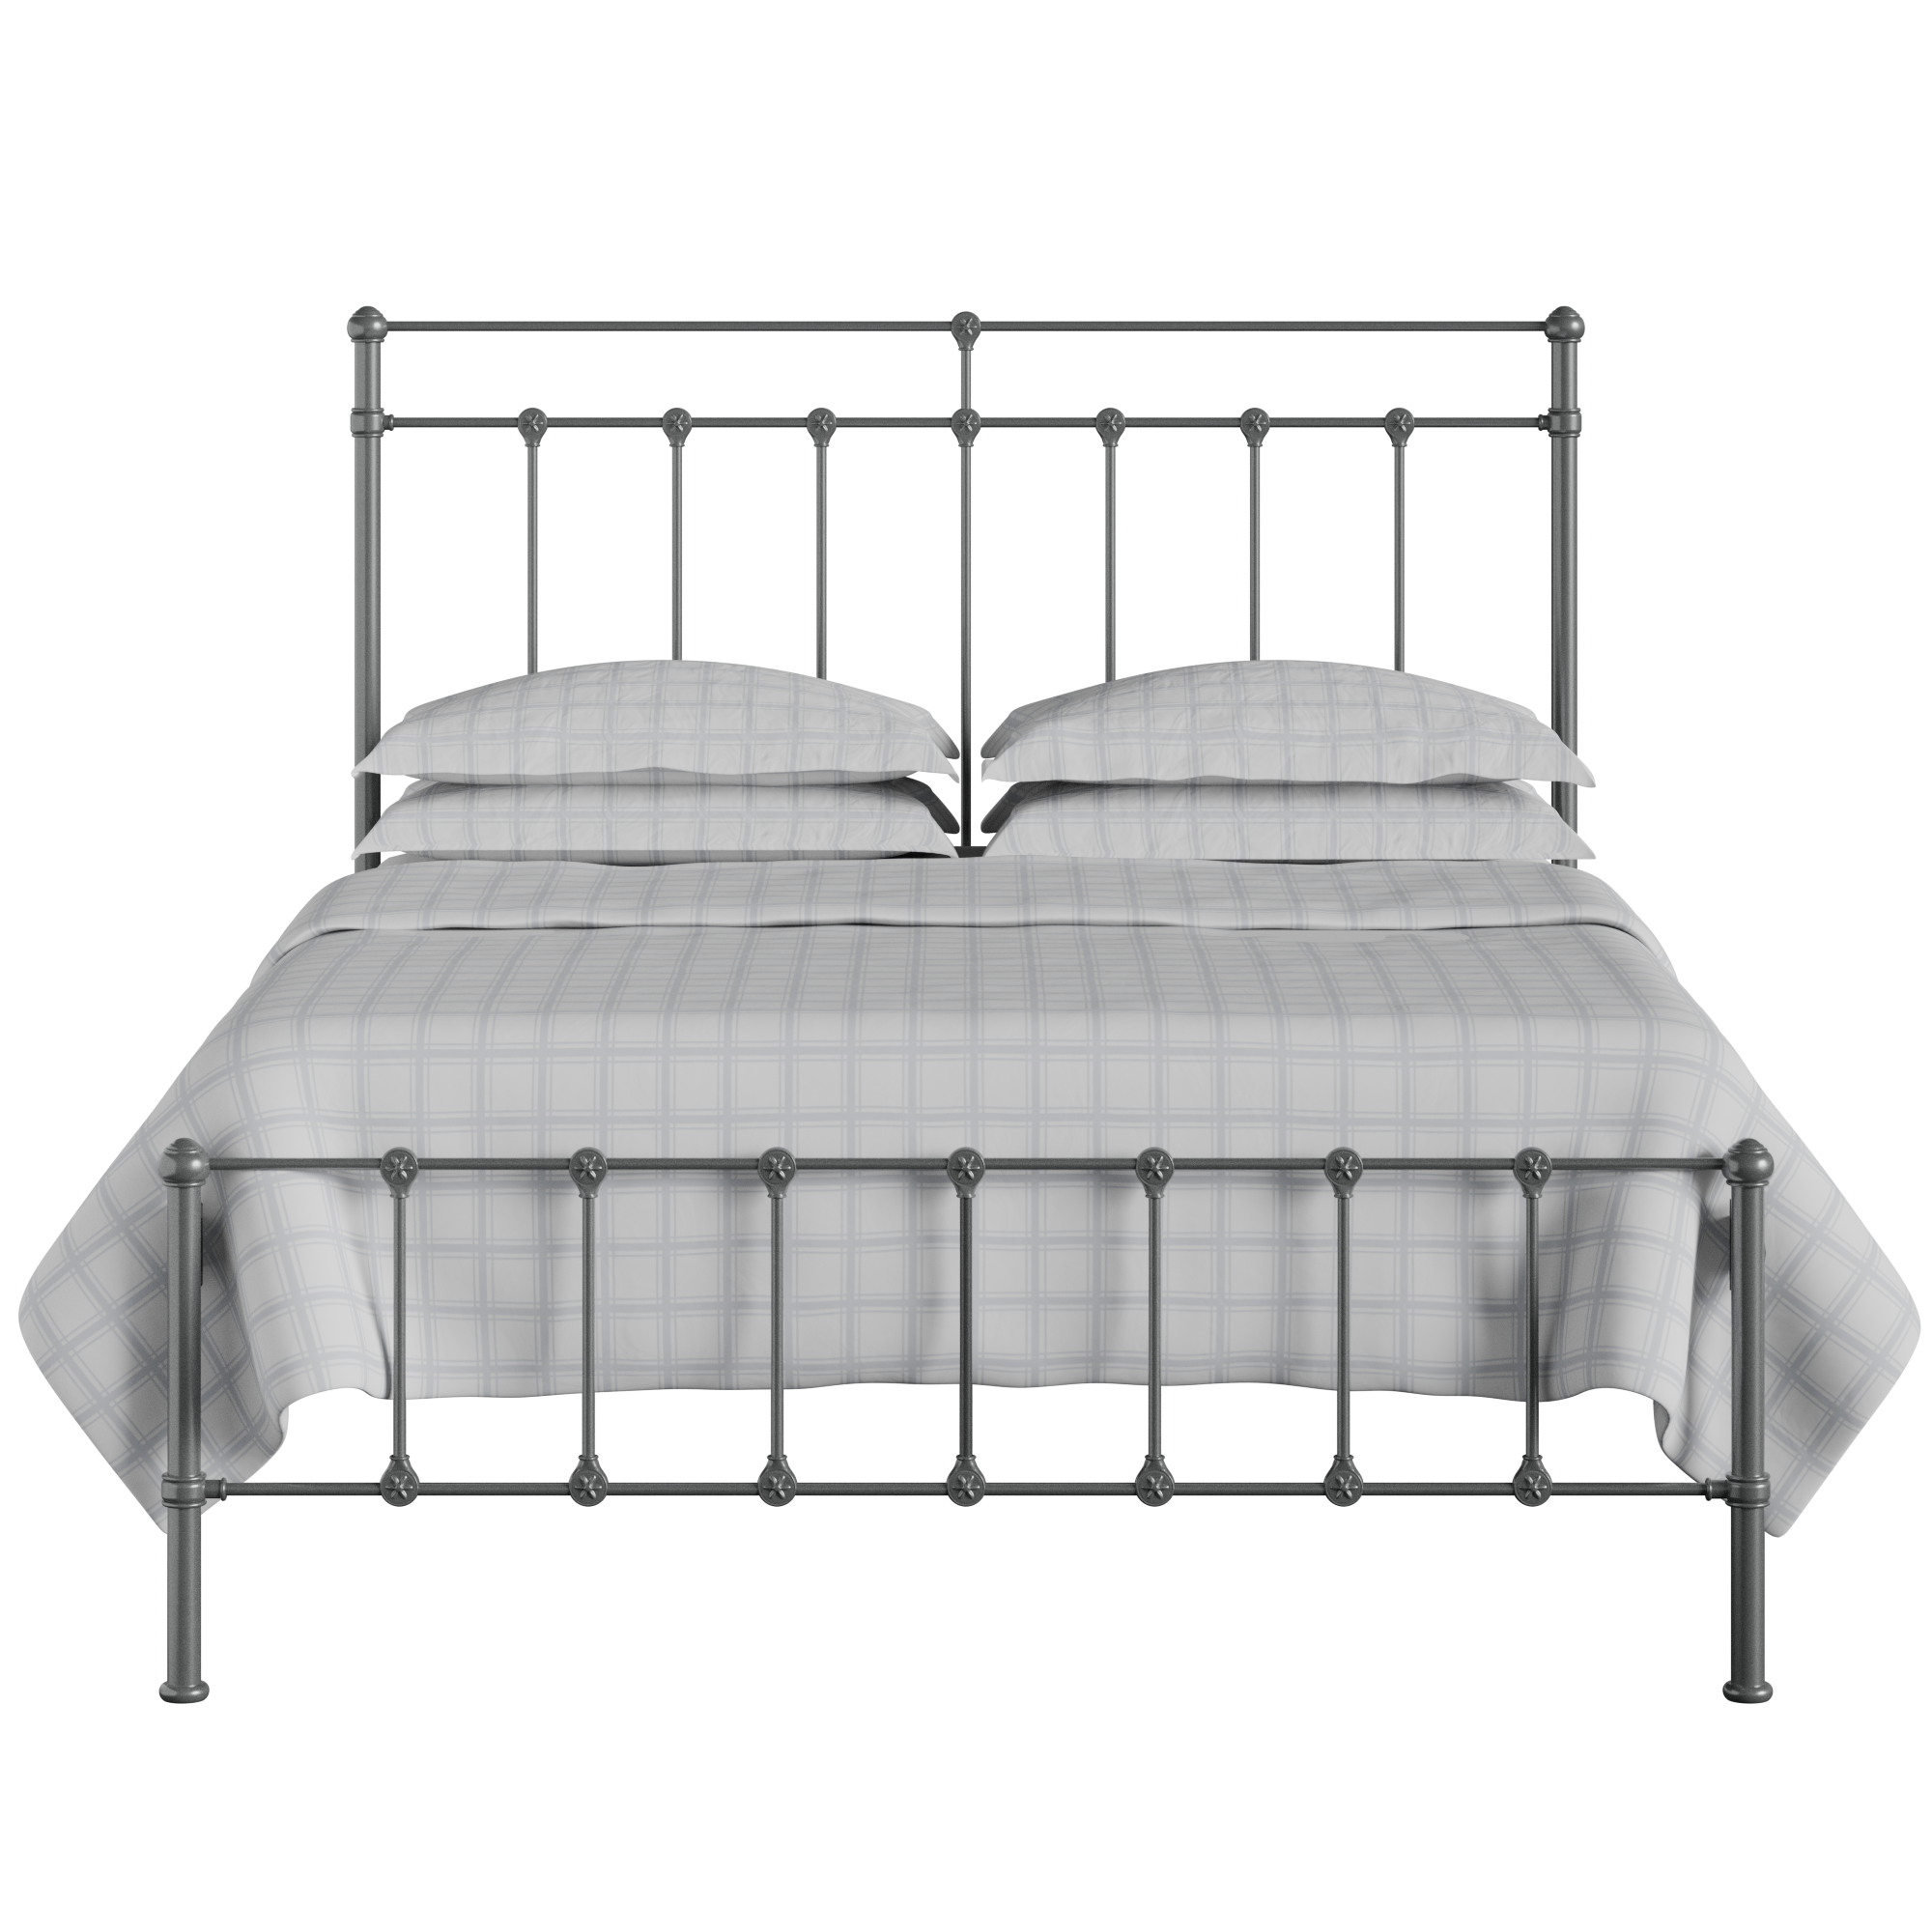 Ashley iron/metal bed in pewter